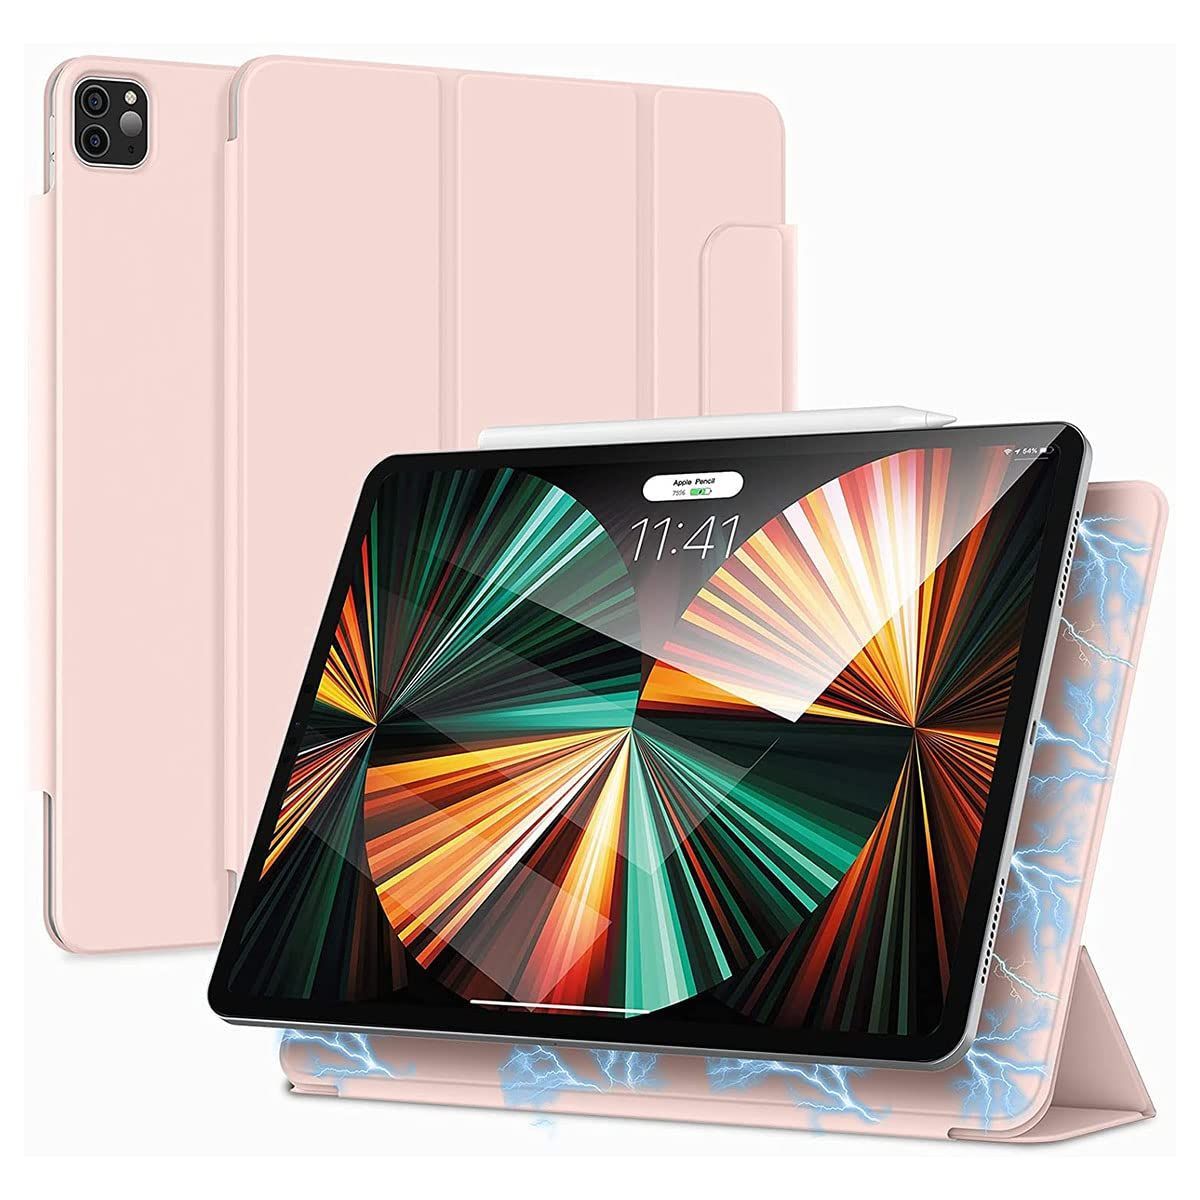 LIRAMARK Magnetic Series Back Cover Case Compatible with Apple iPad Pro 12.9 2021/2020 (5th/4th Gen) , Convenient Magnetic Attachment, Auto Sleep/Wake, Fully Supports Pencil 2 - Pink